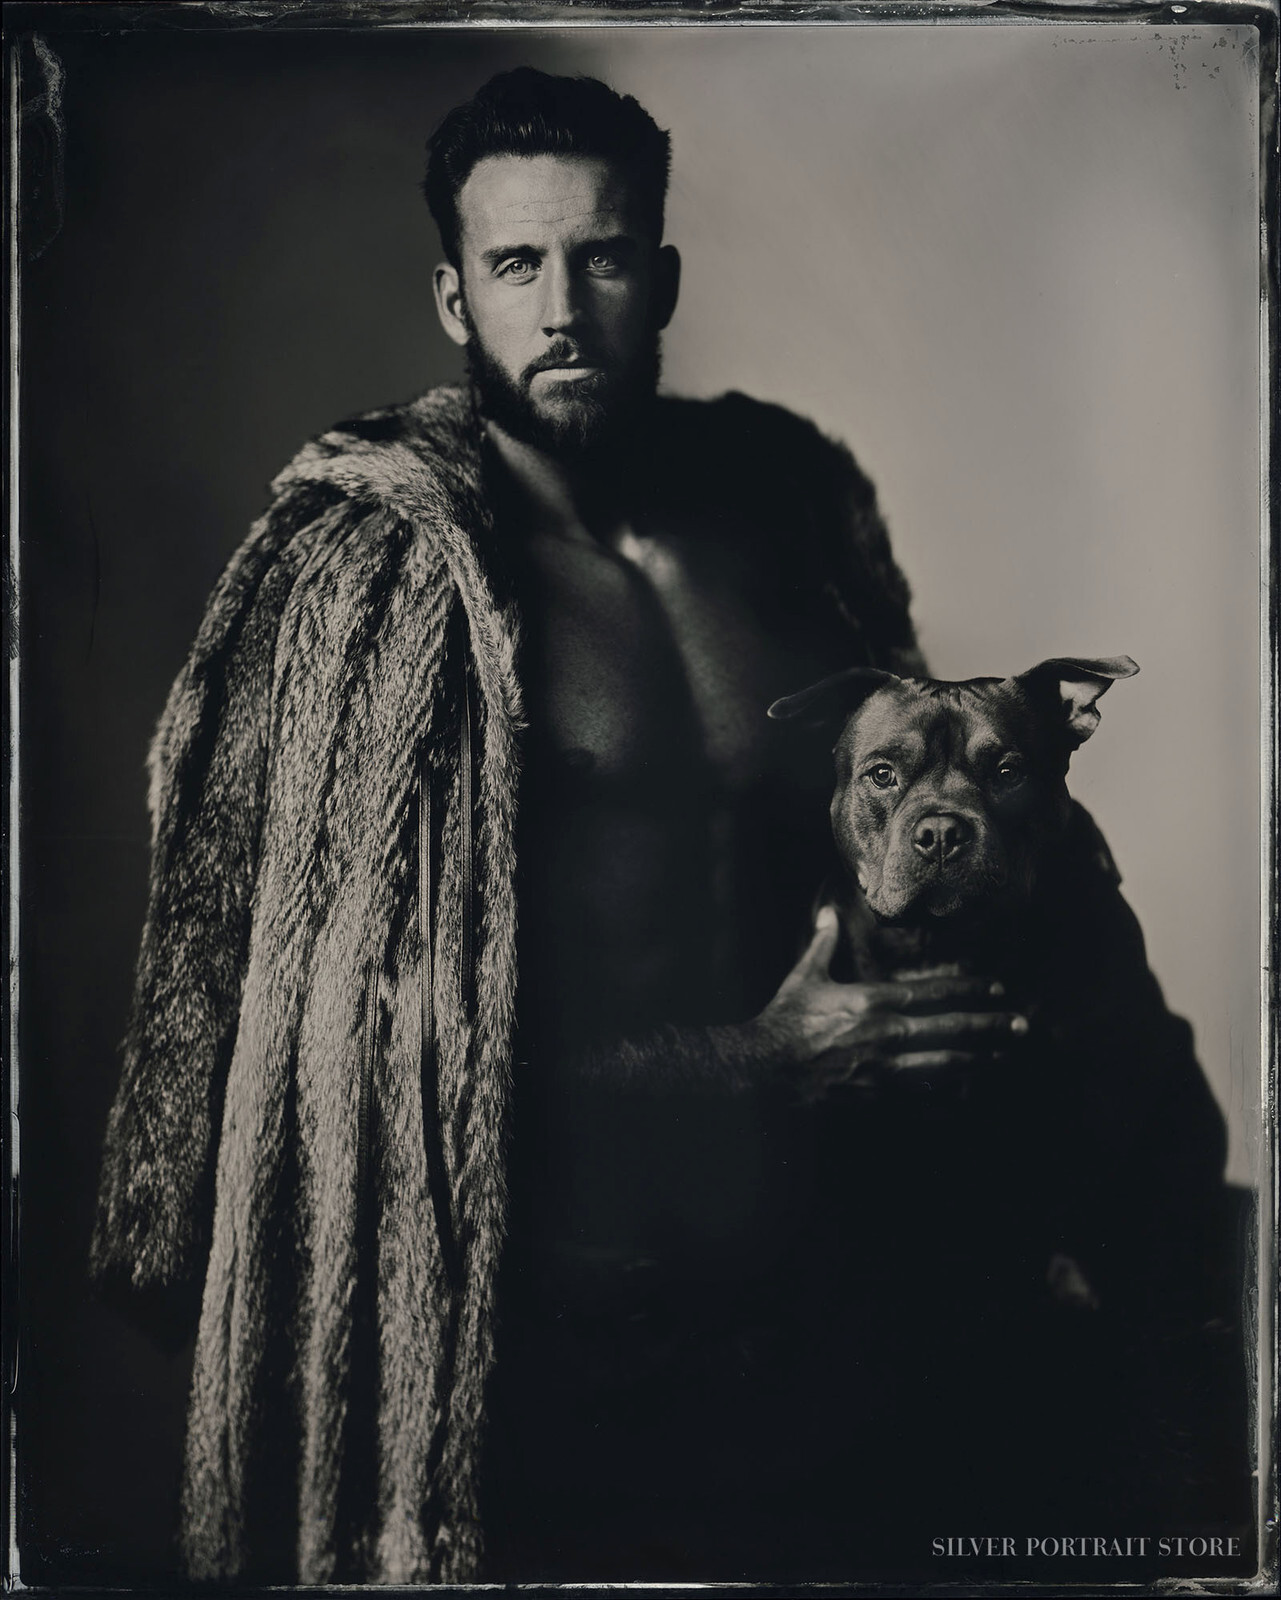 Dylan en Manu-Silver Portrait Store-scan from Wet plate collodion-Tintype 20 x 25 cm.